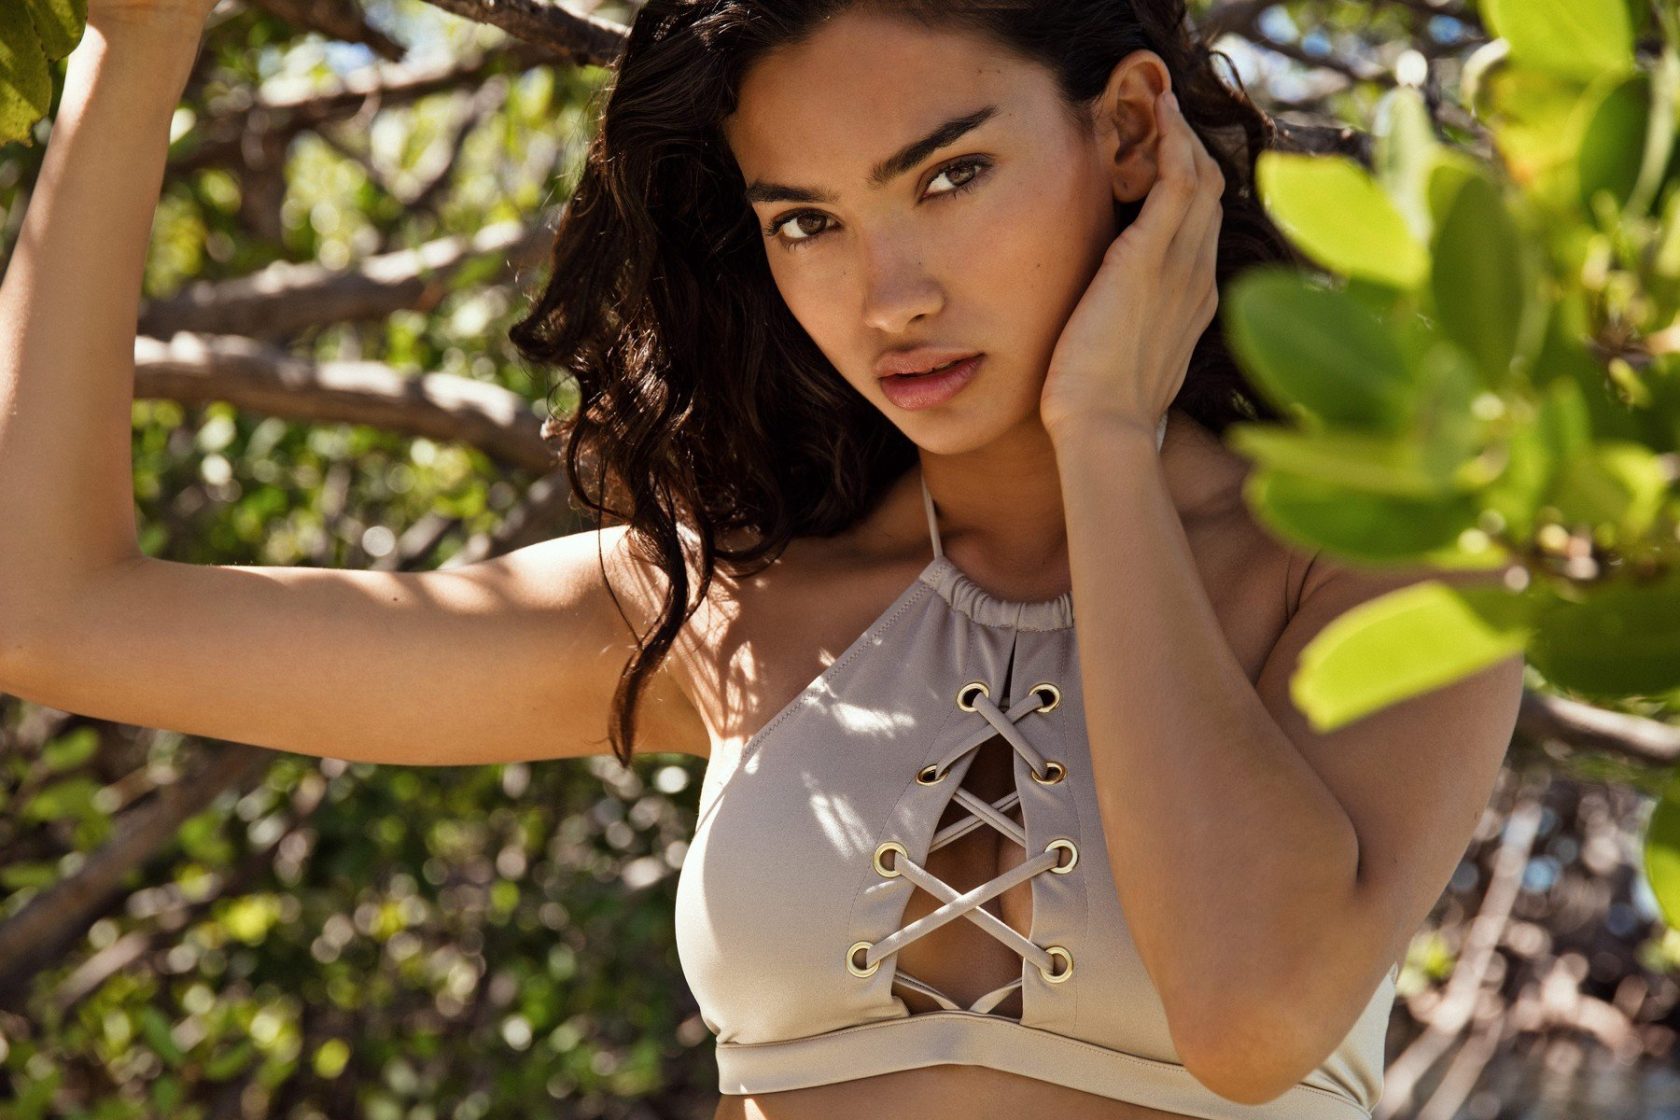 Shes posed for some of the hottest brands and mags on the planet and for her latest turn, Australian-Swedish-Indian model Kelly Gale looks out of this world. The 23-year-old Chanel, Victorias Secret and Sports Illustrated Swimsuit star has now been snapped up by Italian brand Yamamay, and is seen here duly modeling some swimsuits from the summer 2018 collection. Posing in front of palm trees, the ocean in the background, and sitting on a wooden dock, Kelly strike some seriously sexy poses for the Puerto Rico campaign, which is also raising awareness about the environment with a #savetheocean hashtag. And if we are to expect more shots of Kelly posing in her bikini by the ocean, then its certainly worth saving. 30 May 2018, Image: 373412036, License: Rights-managed, Restrictions: World Rights, Model Release: no, Credit line: Profimedia, Mega Agency